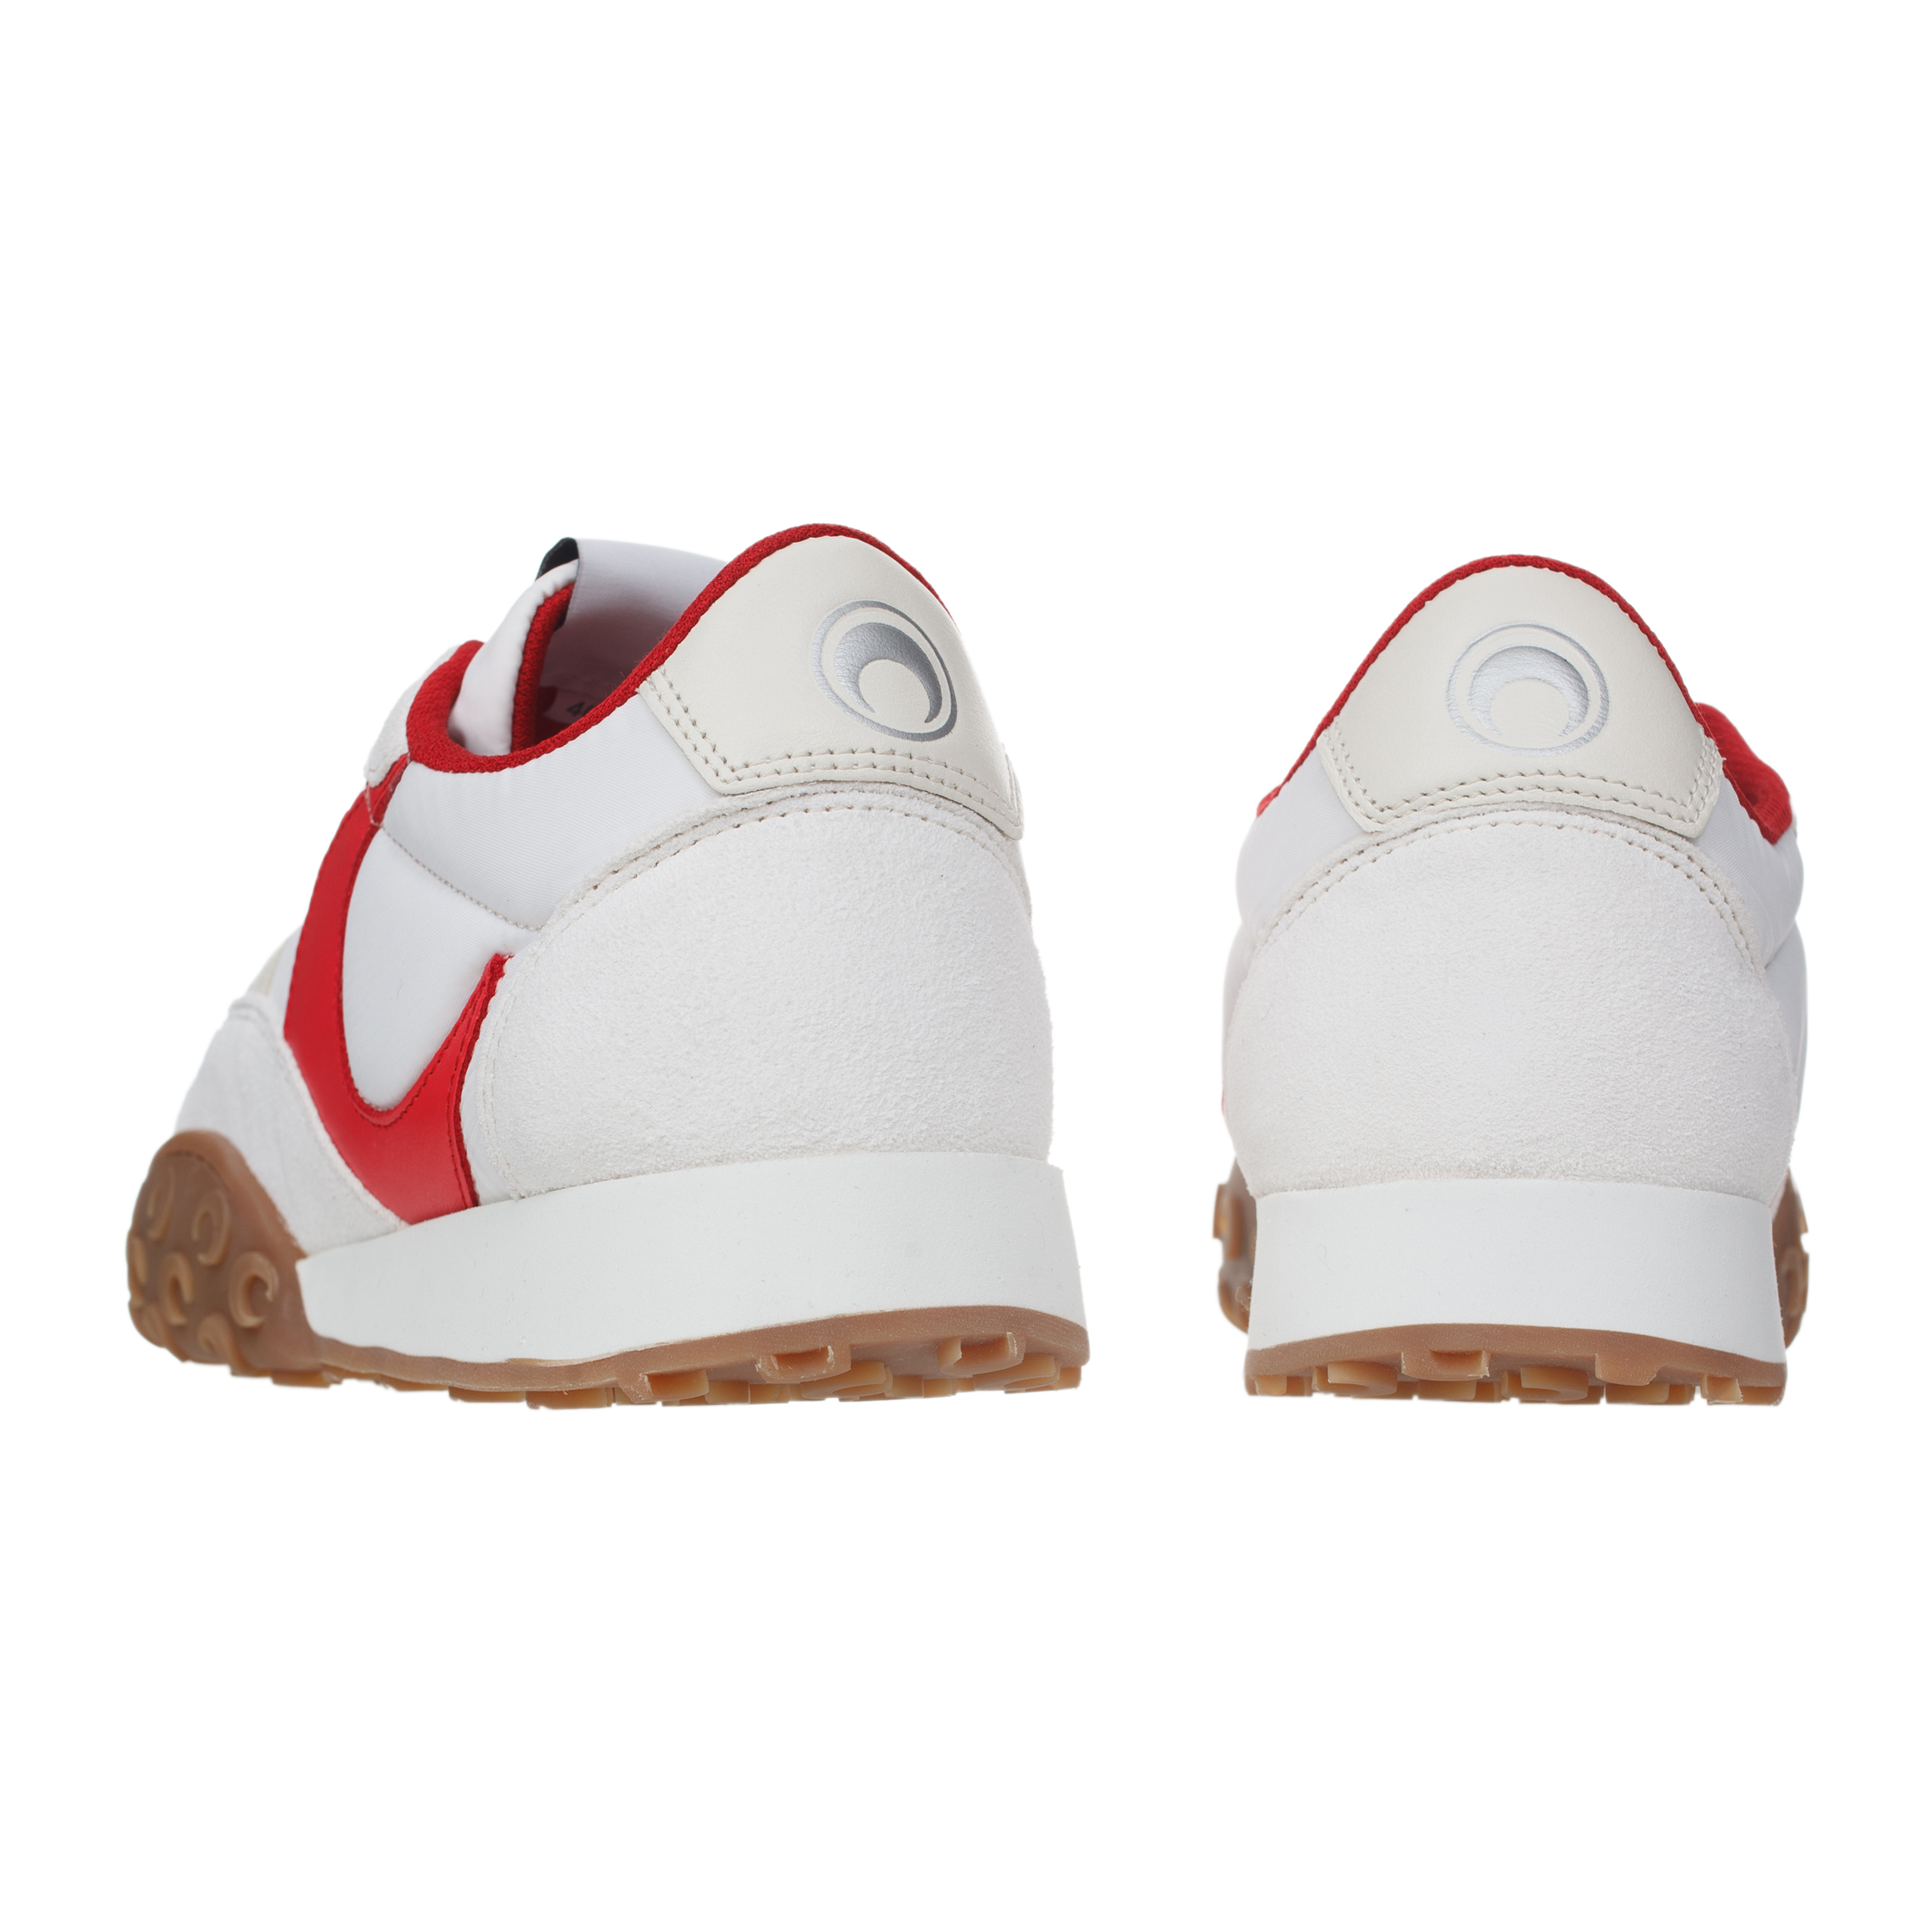 Shop Marine Serre Ms Rise Sneakers In White